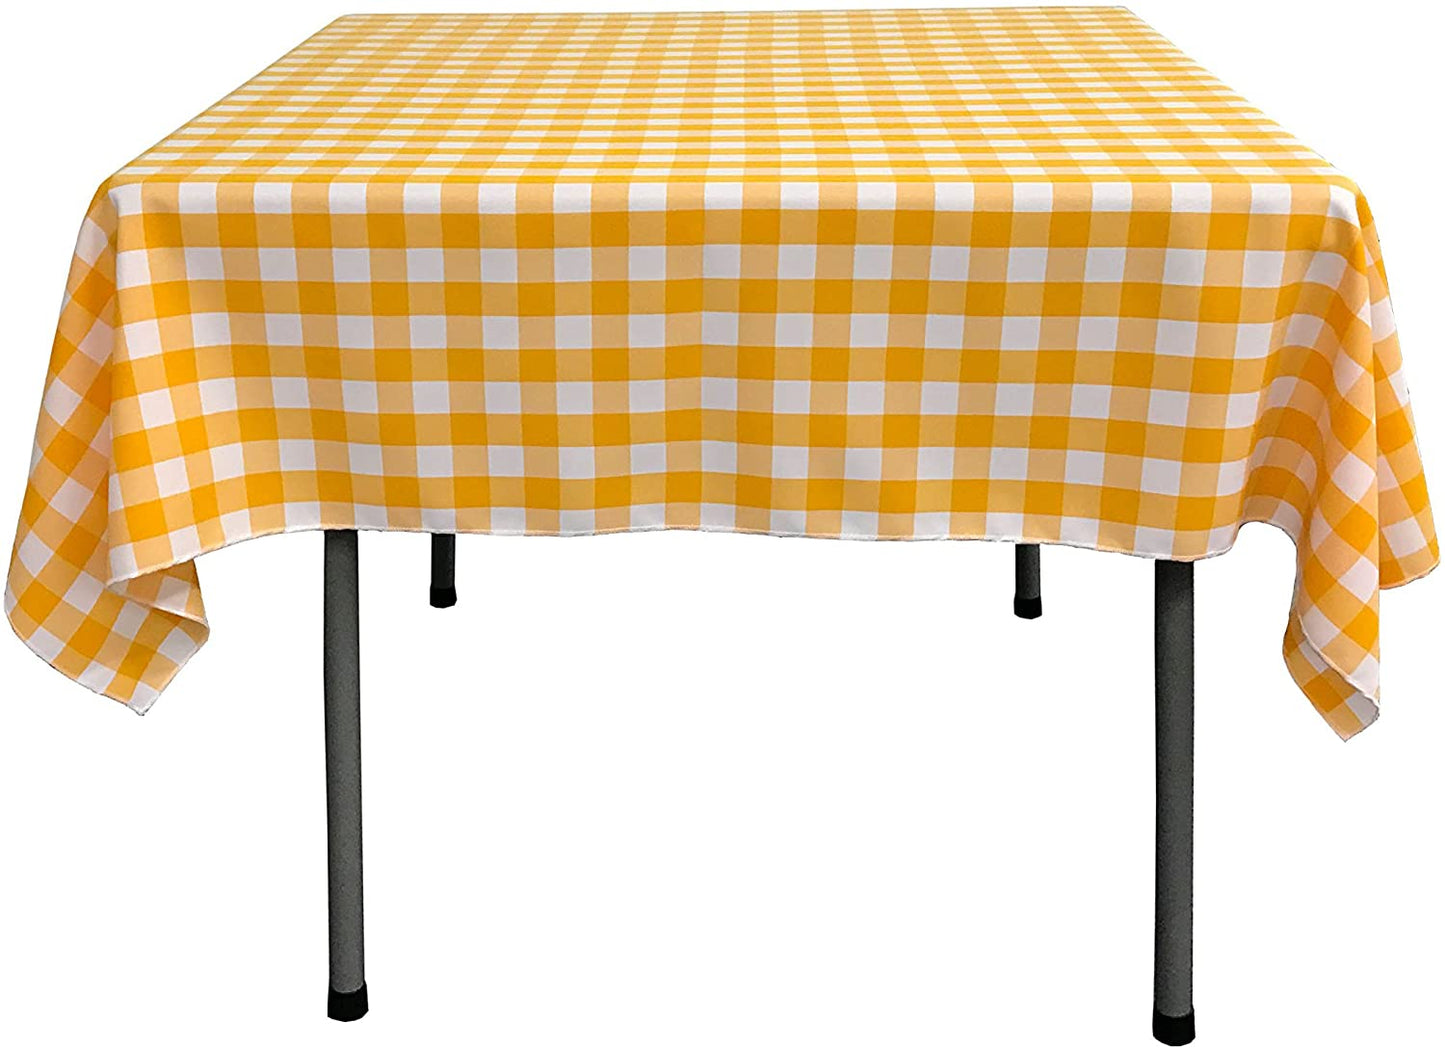 Gingham Checkered Square Tablecloth Dk Yellow and White